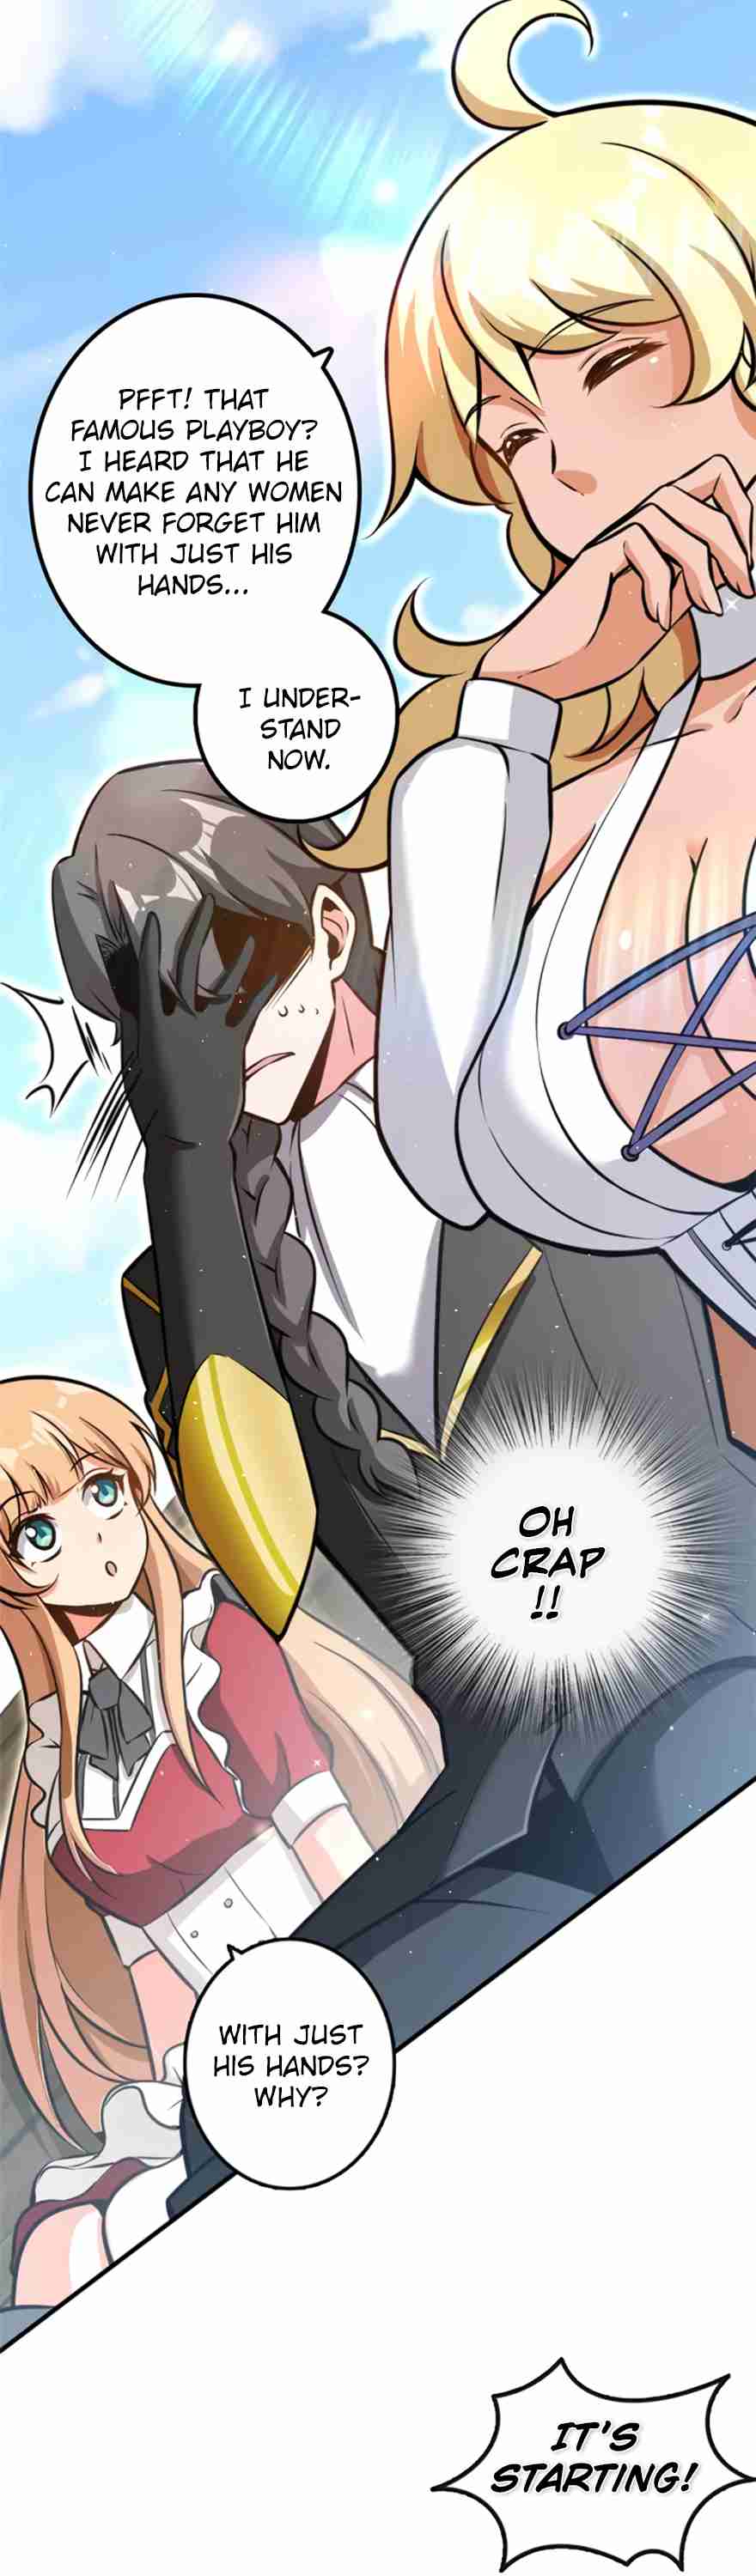 Release That Witch Ch. 117 The Show is Starting!